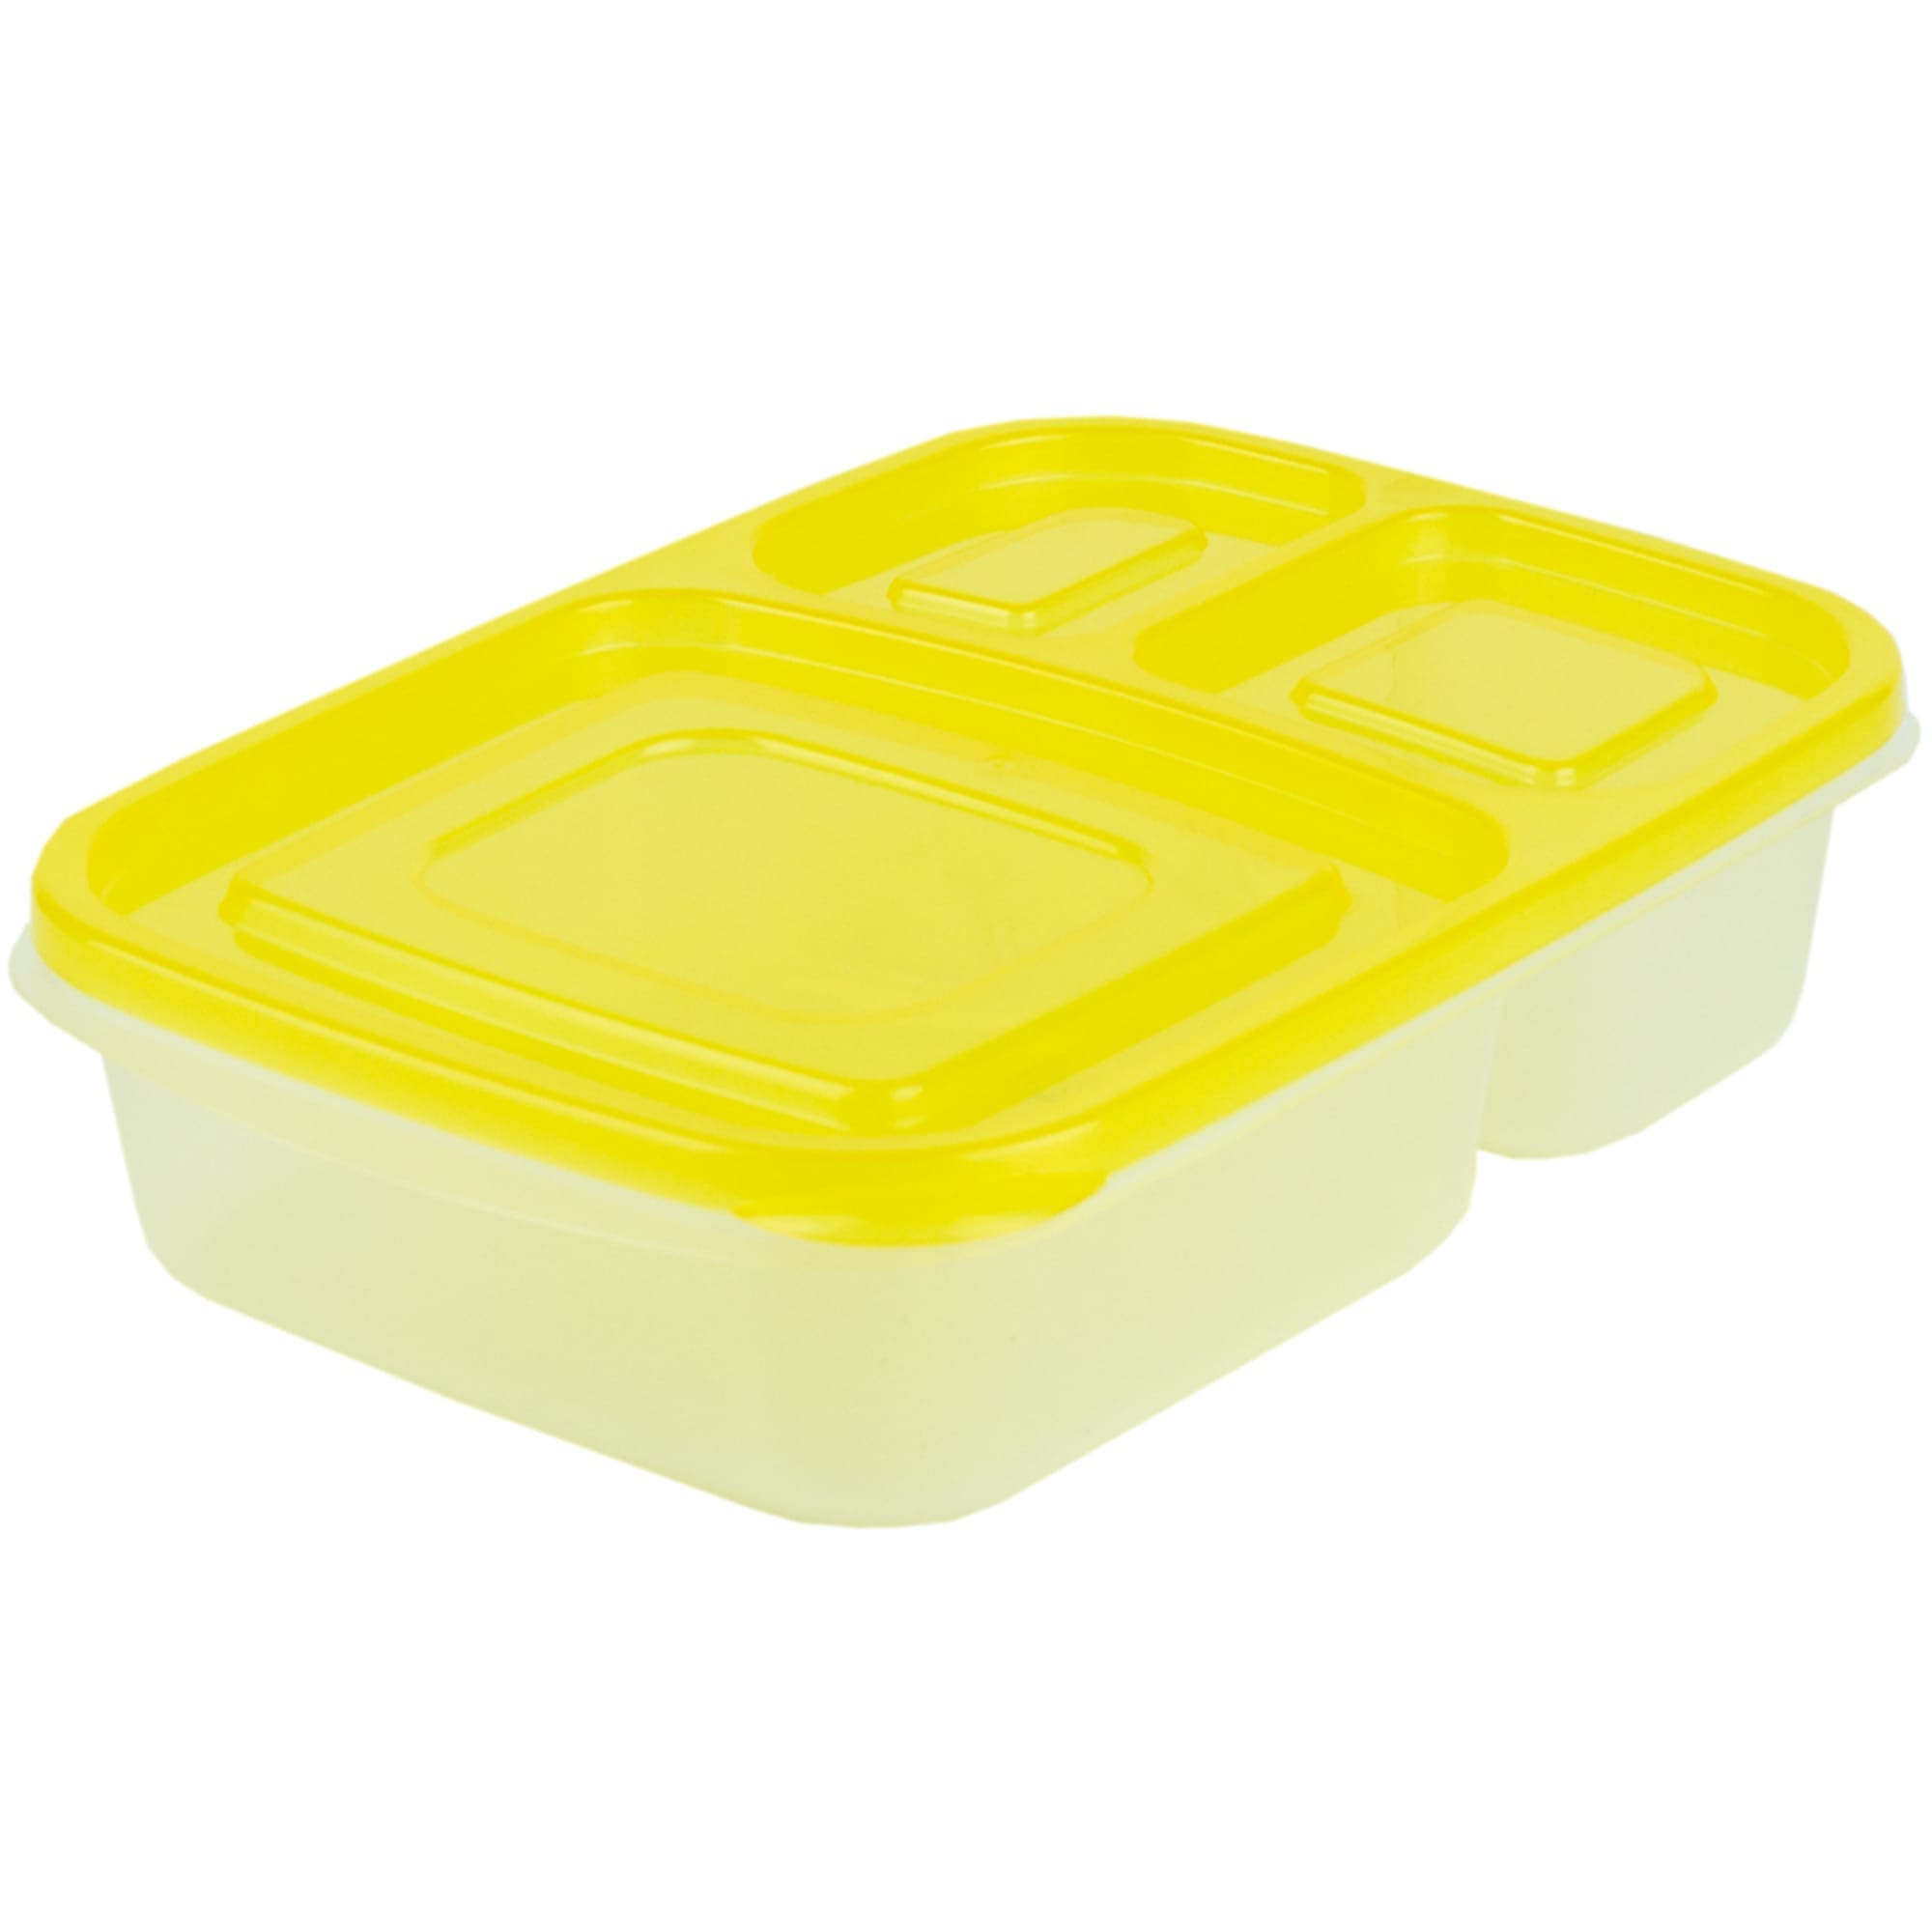 Home Basics 3 Section Plastic Food Storage Containers, (Set of 4), Yellow $6.00 EACH, CASE PACK OF 12